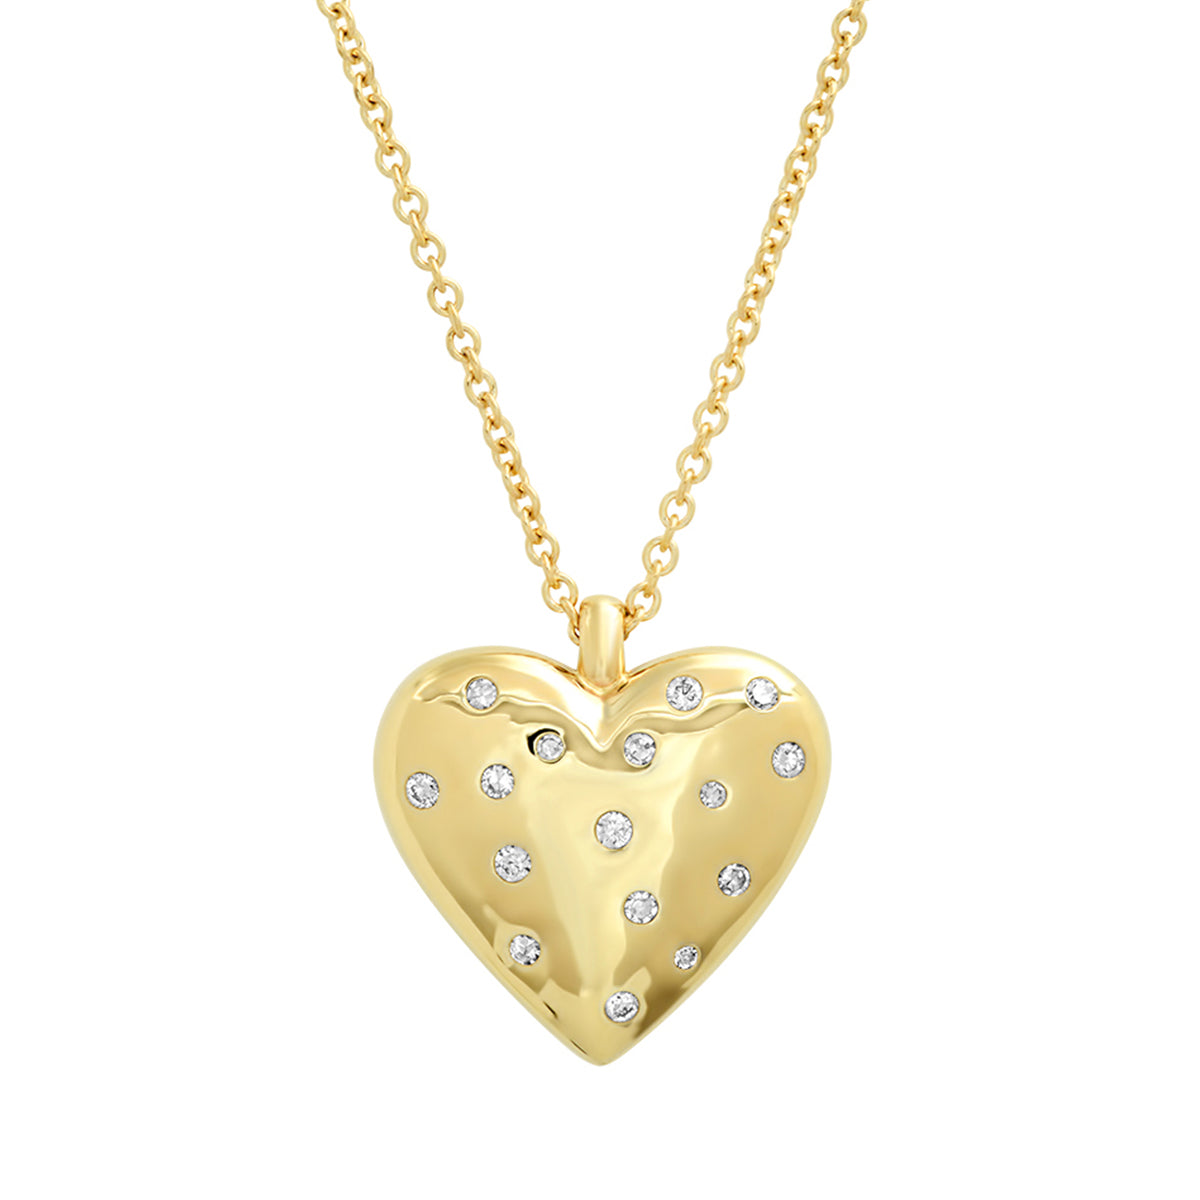 Gold Puffy Heart Pendant and Gold Filled Necklace, Puffed Heart, Hammered,  Matte Gold, Heart of Gold, Simple, Gold Jewelry, Mother's Day - Etsy